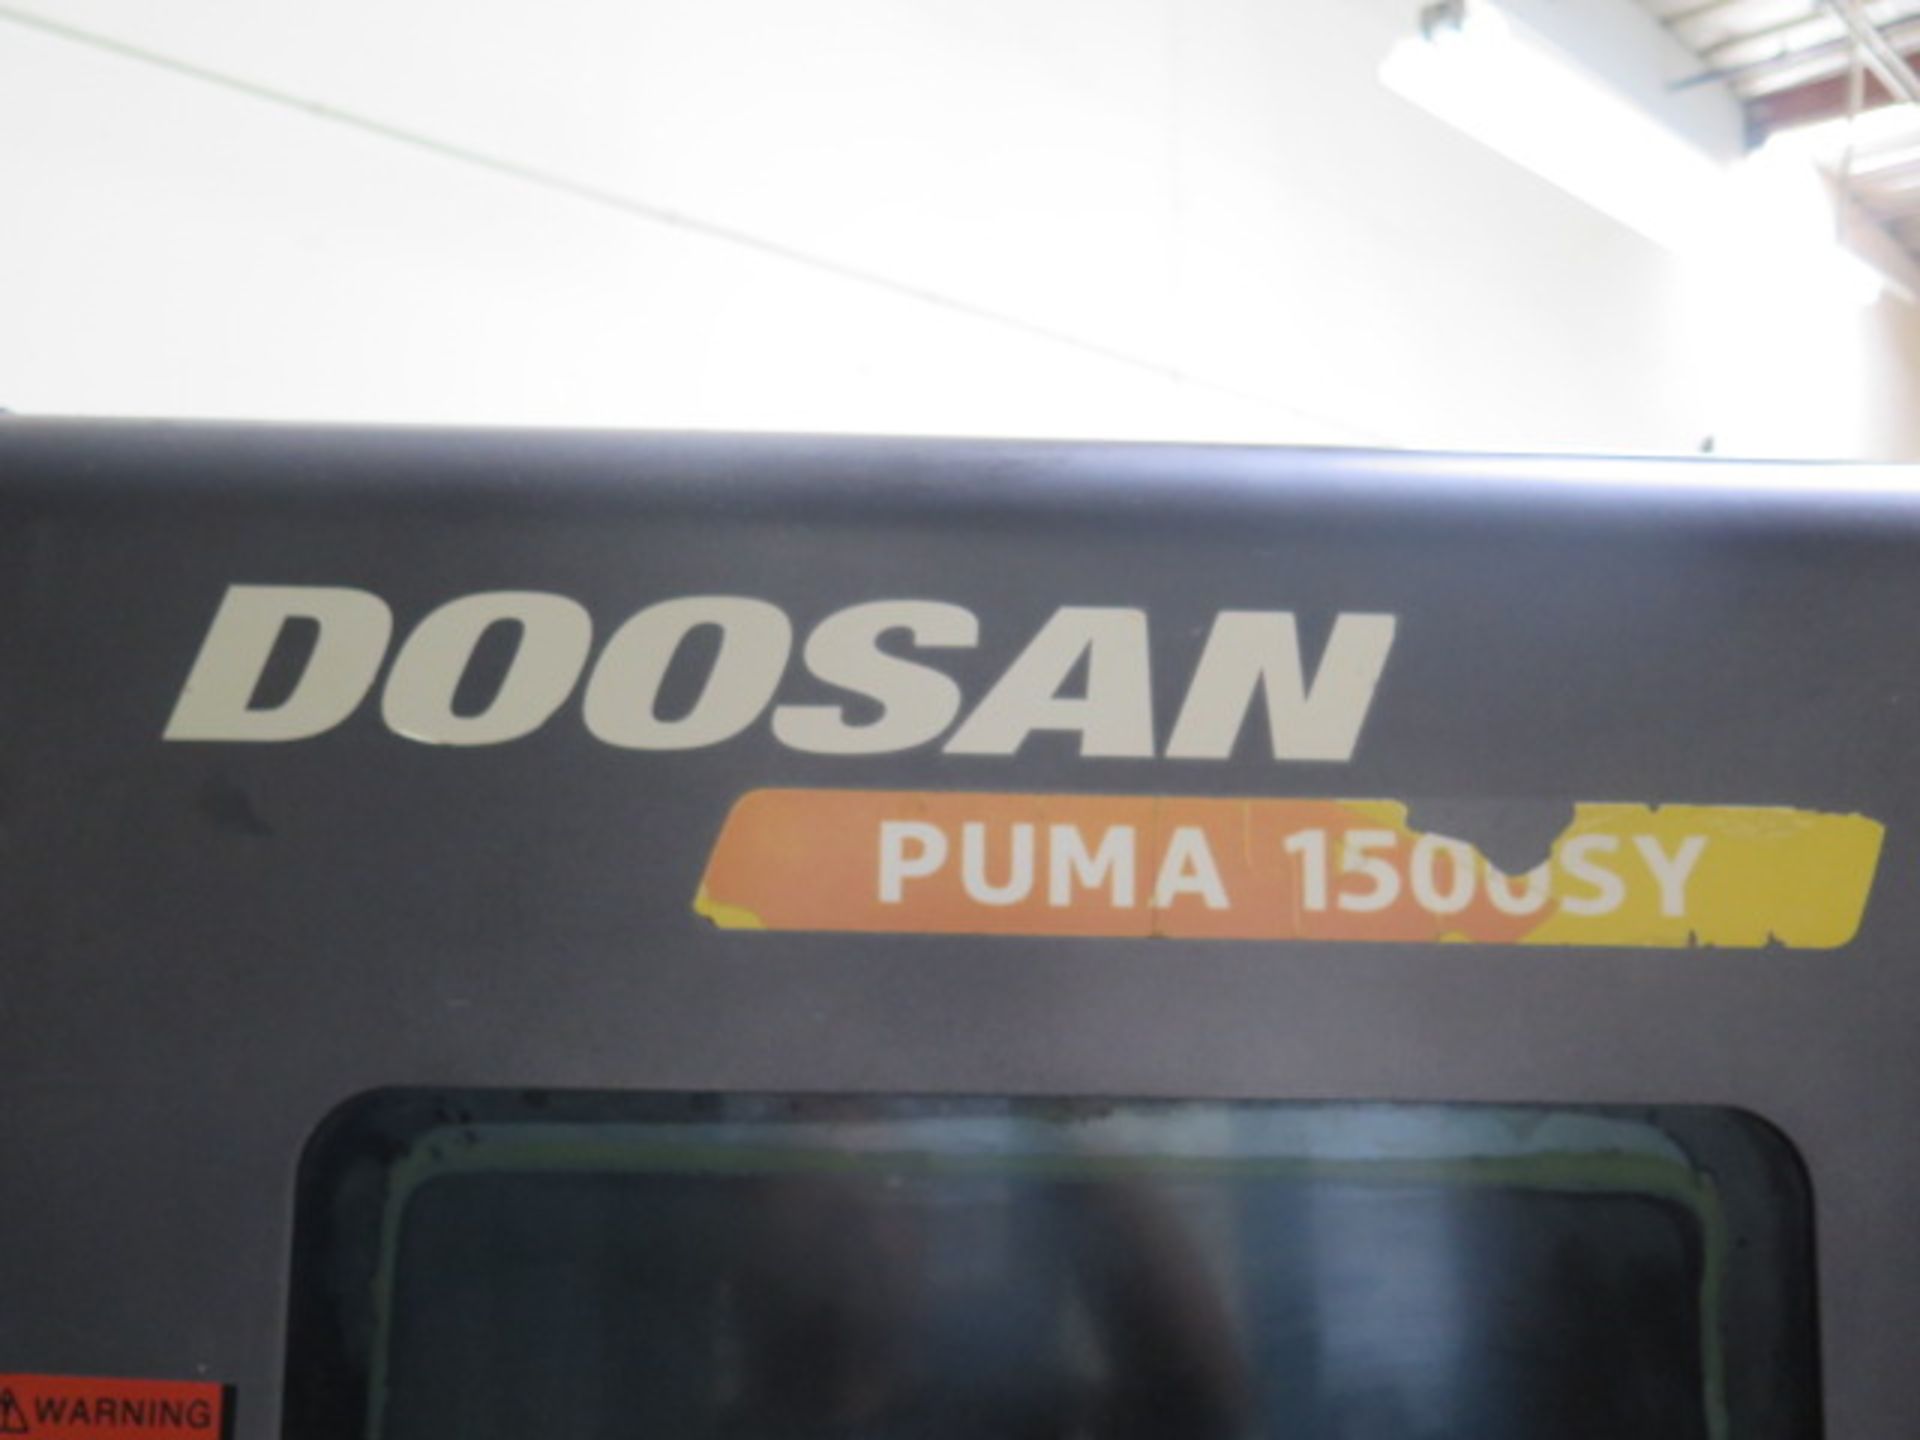 2008 Doosan PUMA 1500SY 5-Axis Twin Spindle Live Turret CNC Turning Center s/n P150SY1041,SOLD AS IS - Image 15 of 17